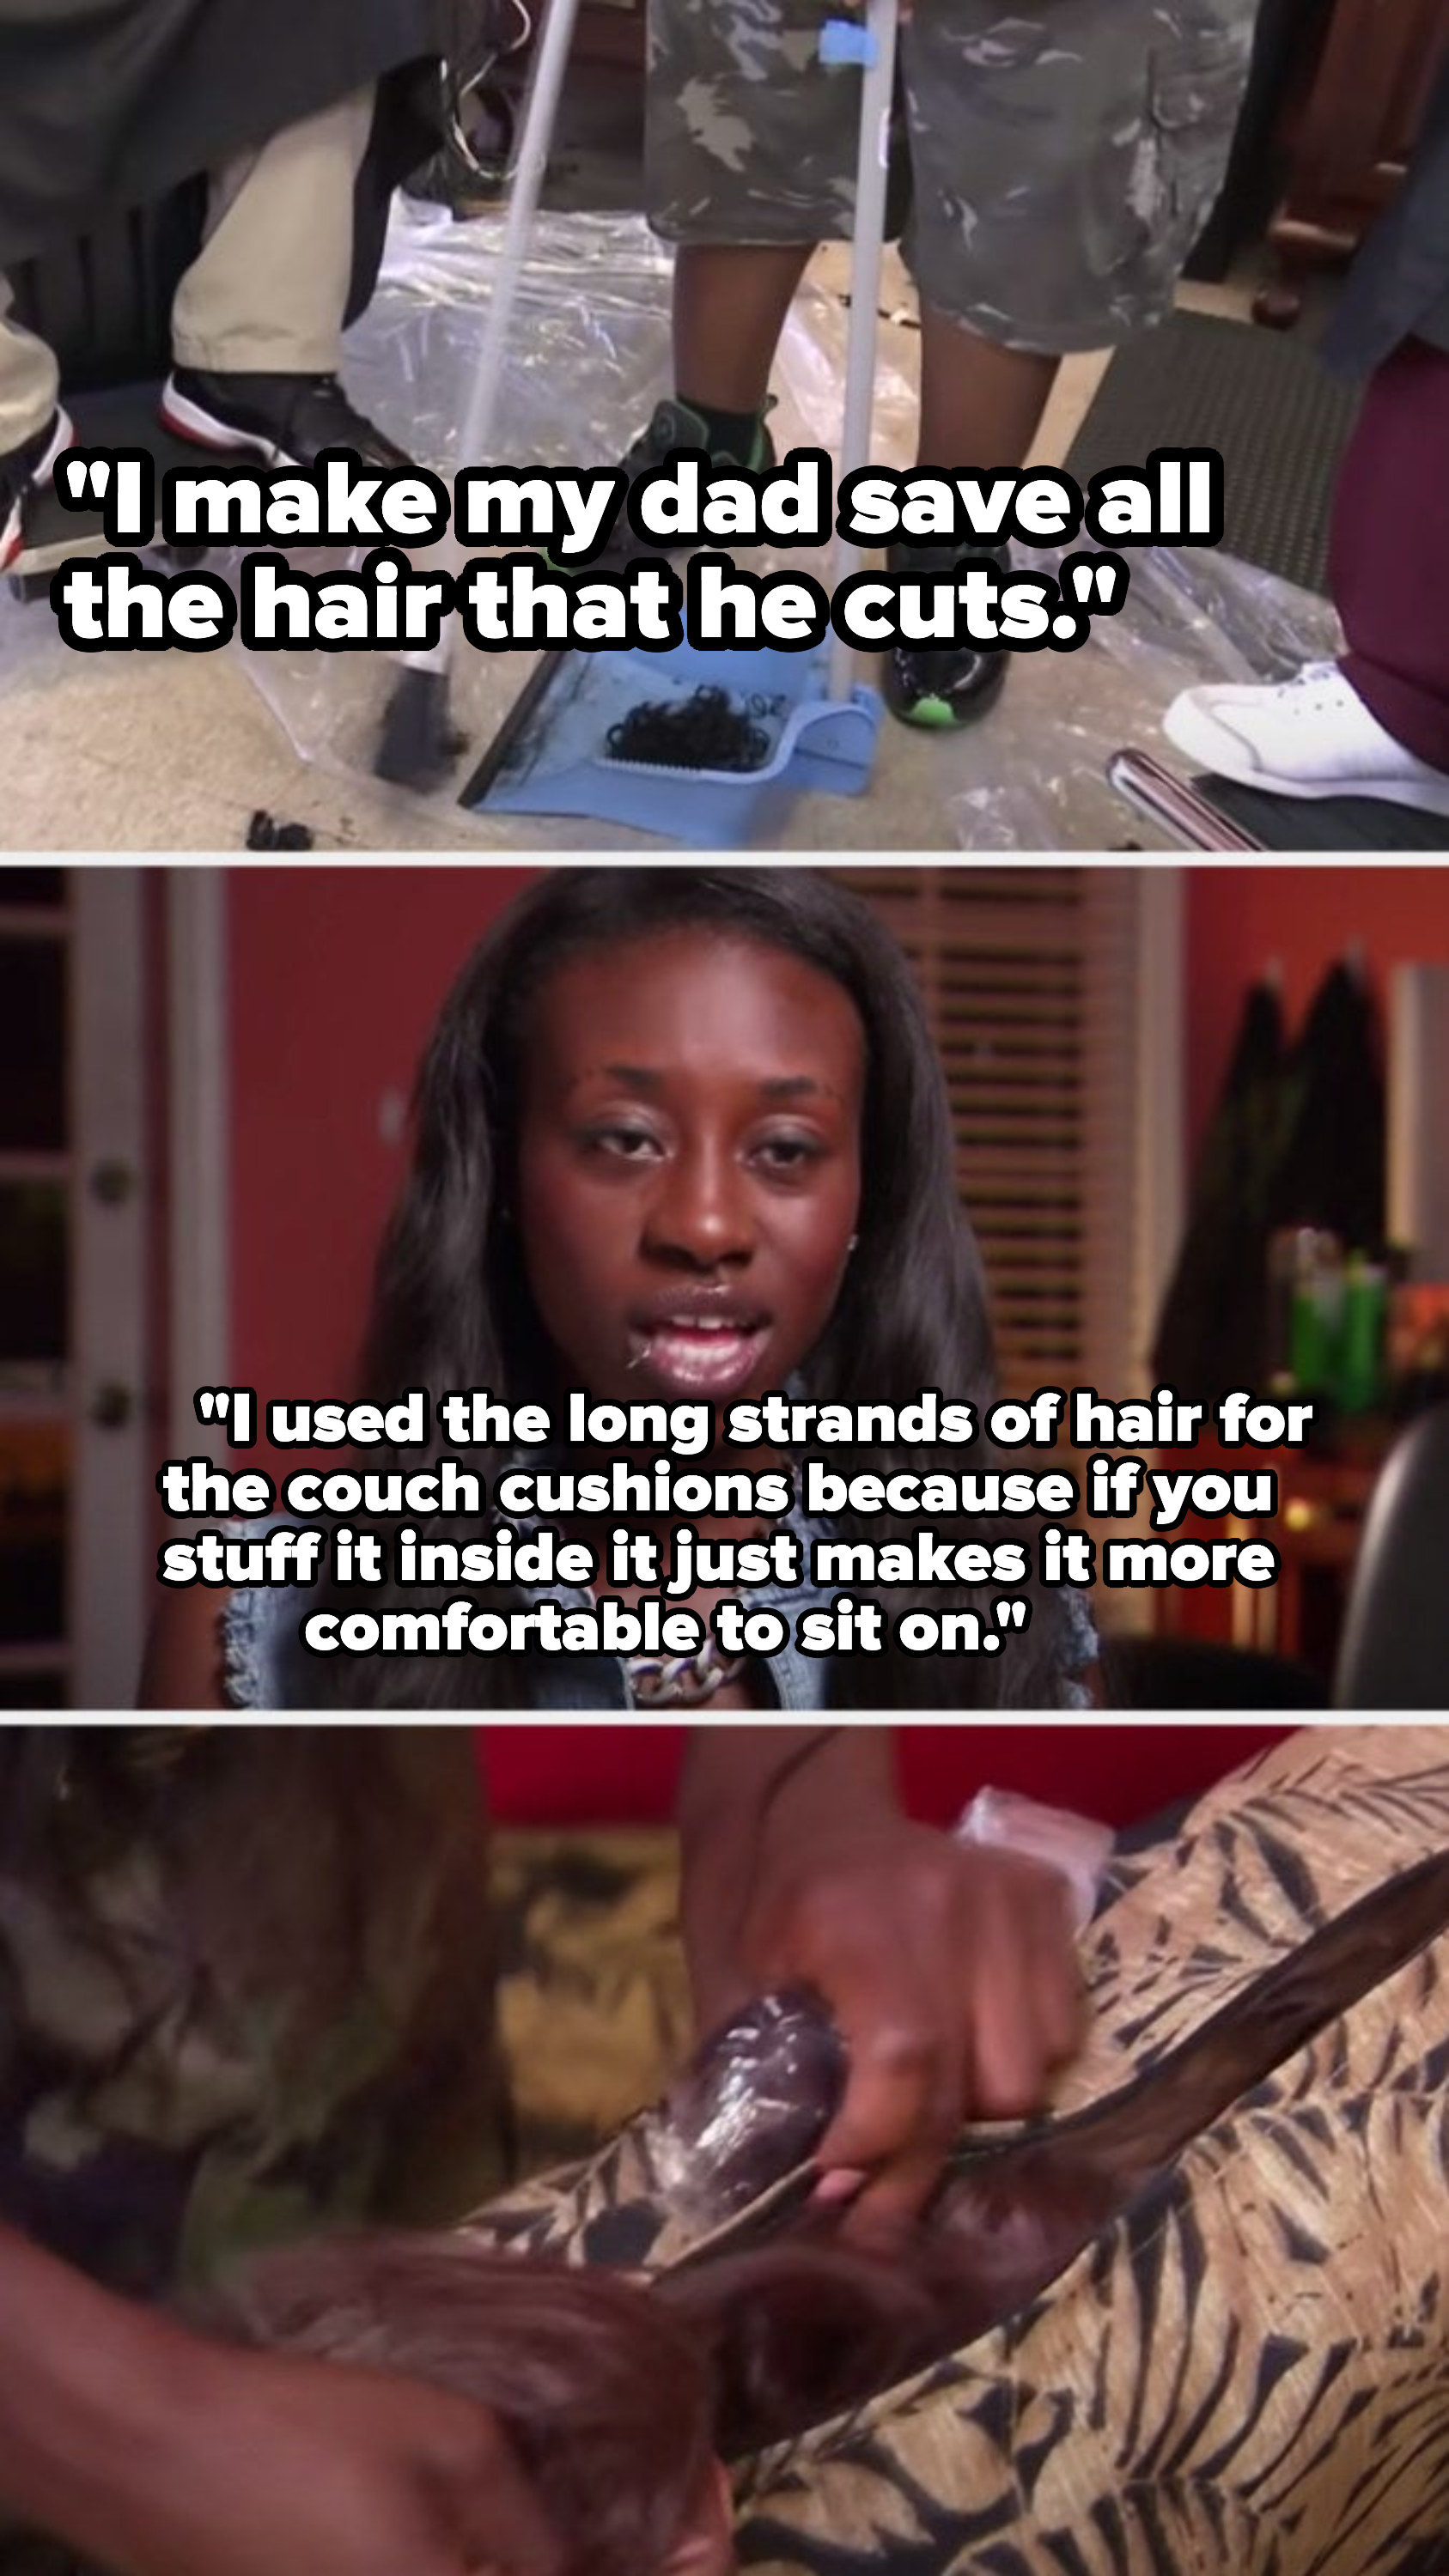 A woman taking hair from the floor of a barber shop to stuff couch cushions